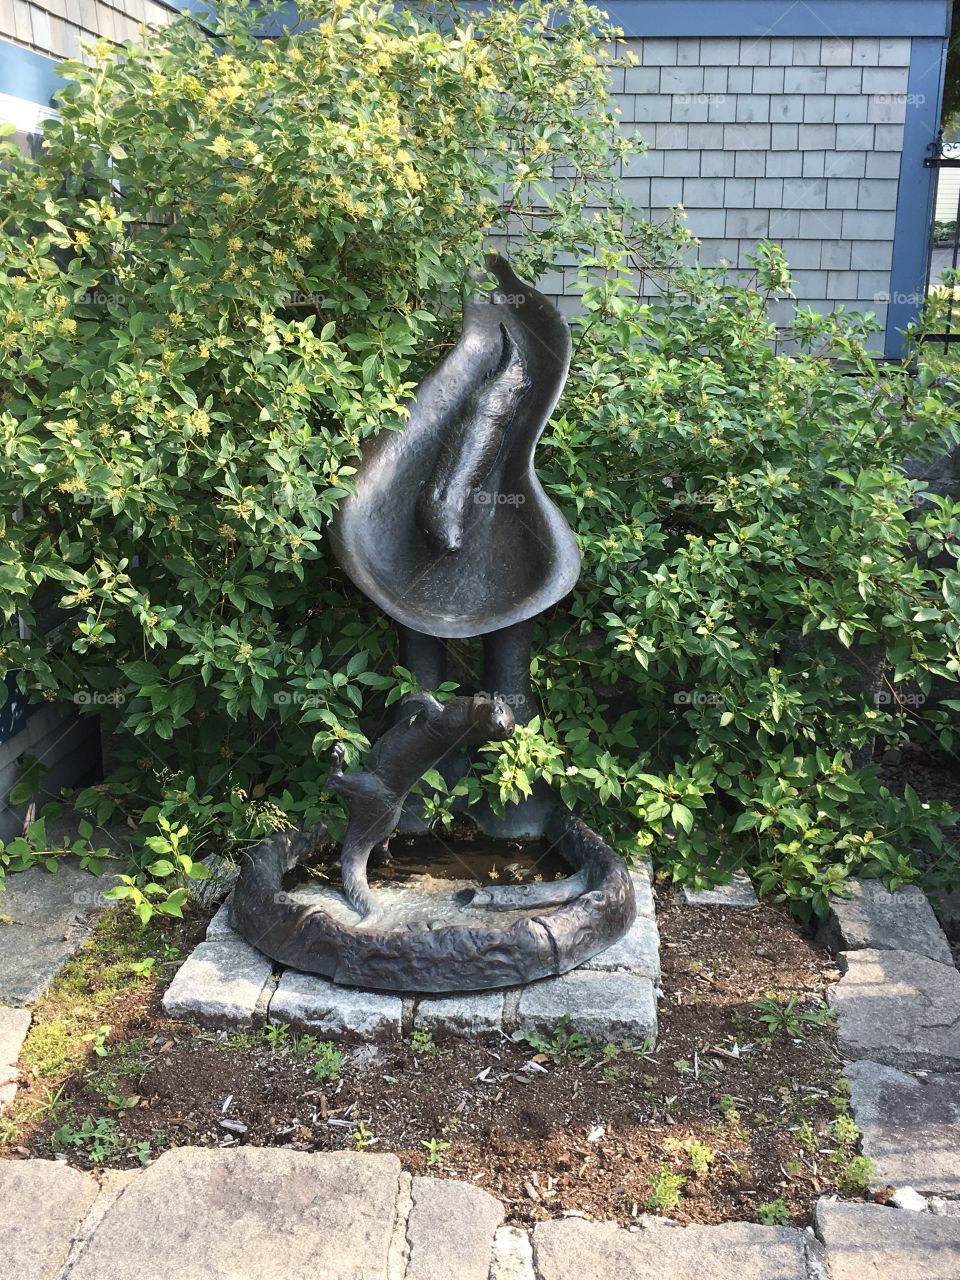 Sculpture of an otter with fountain